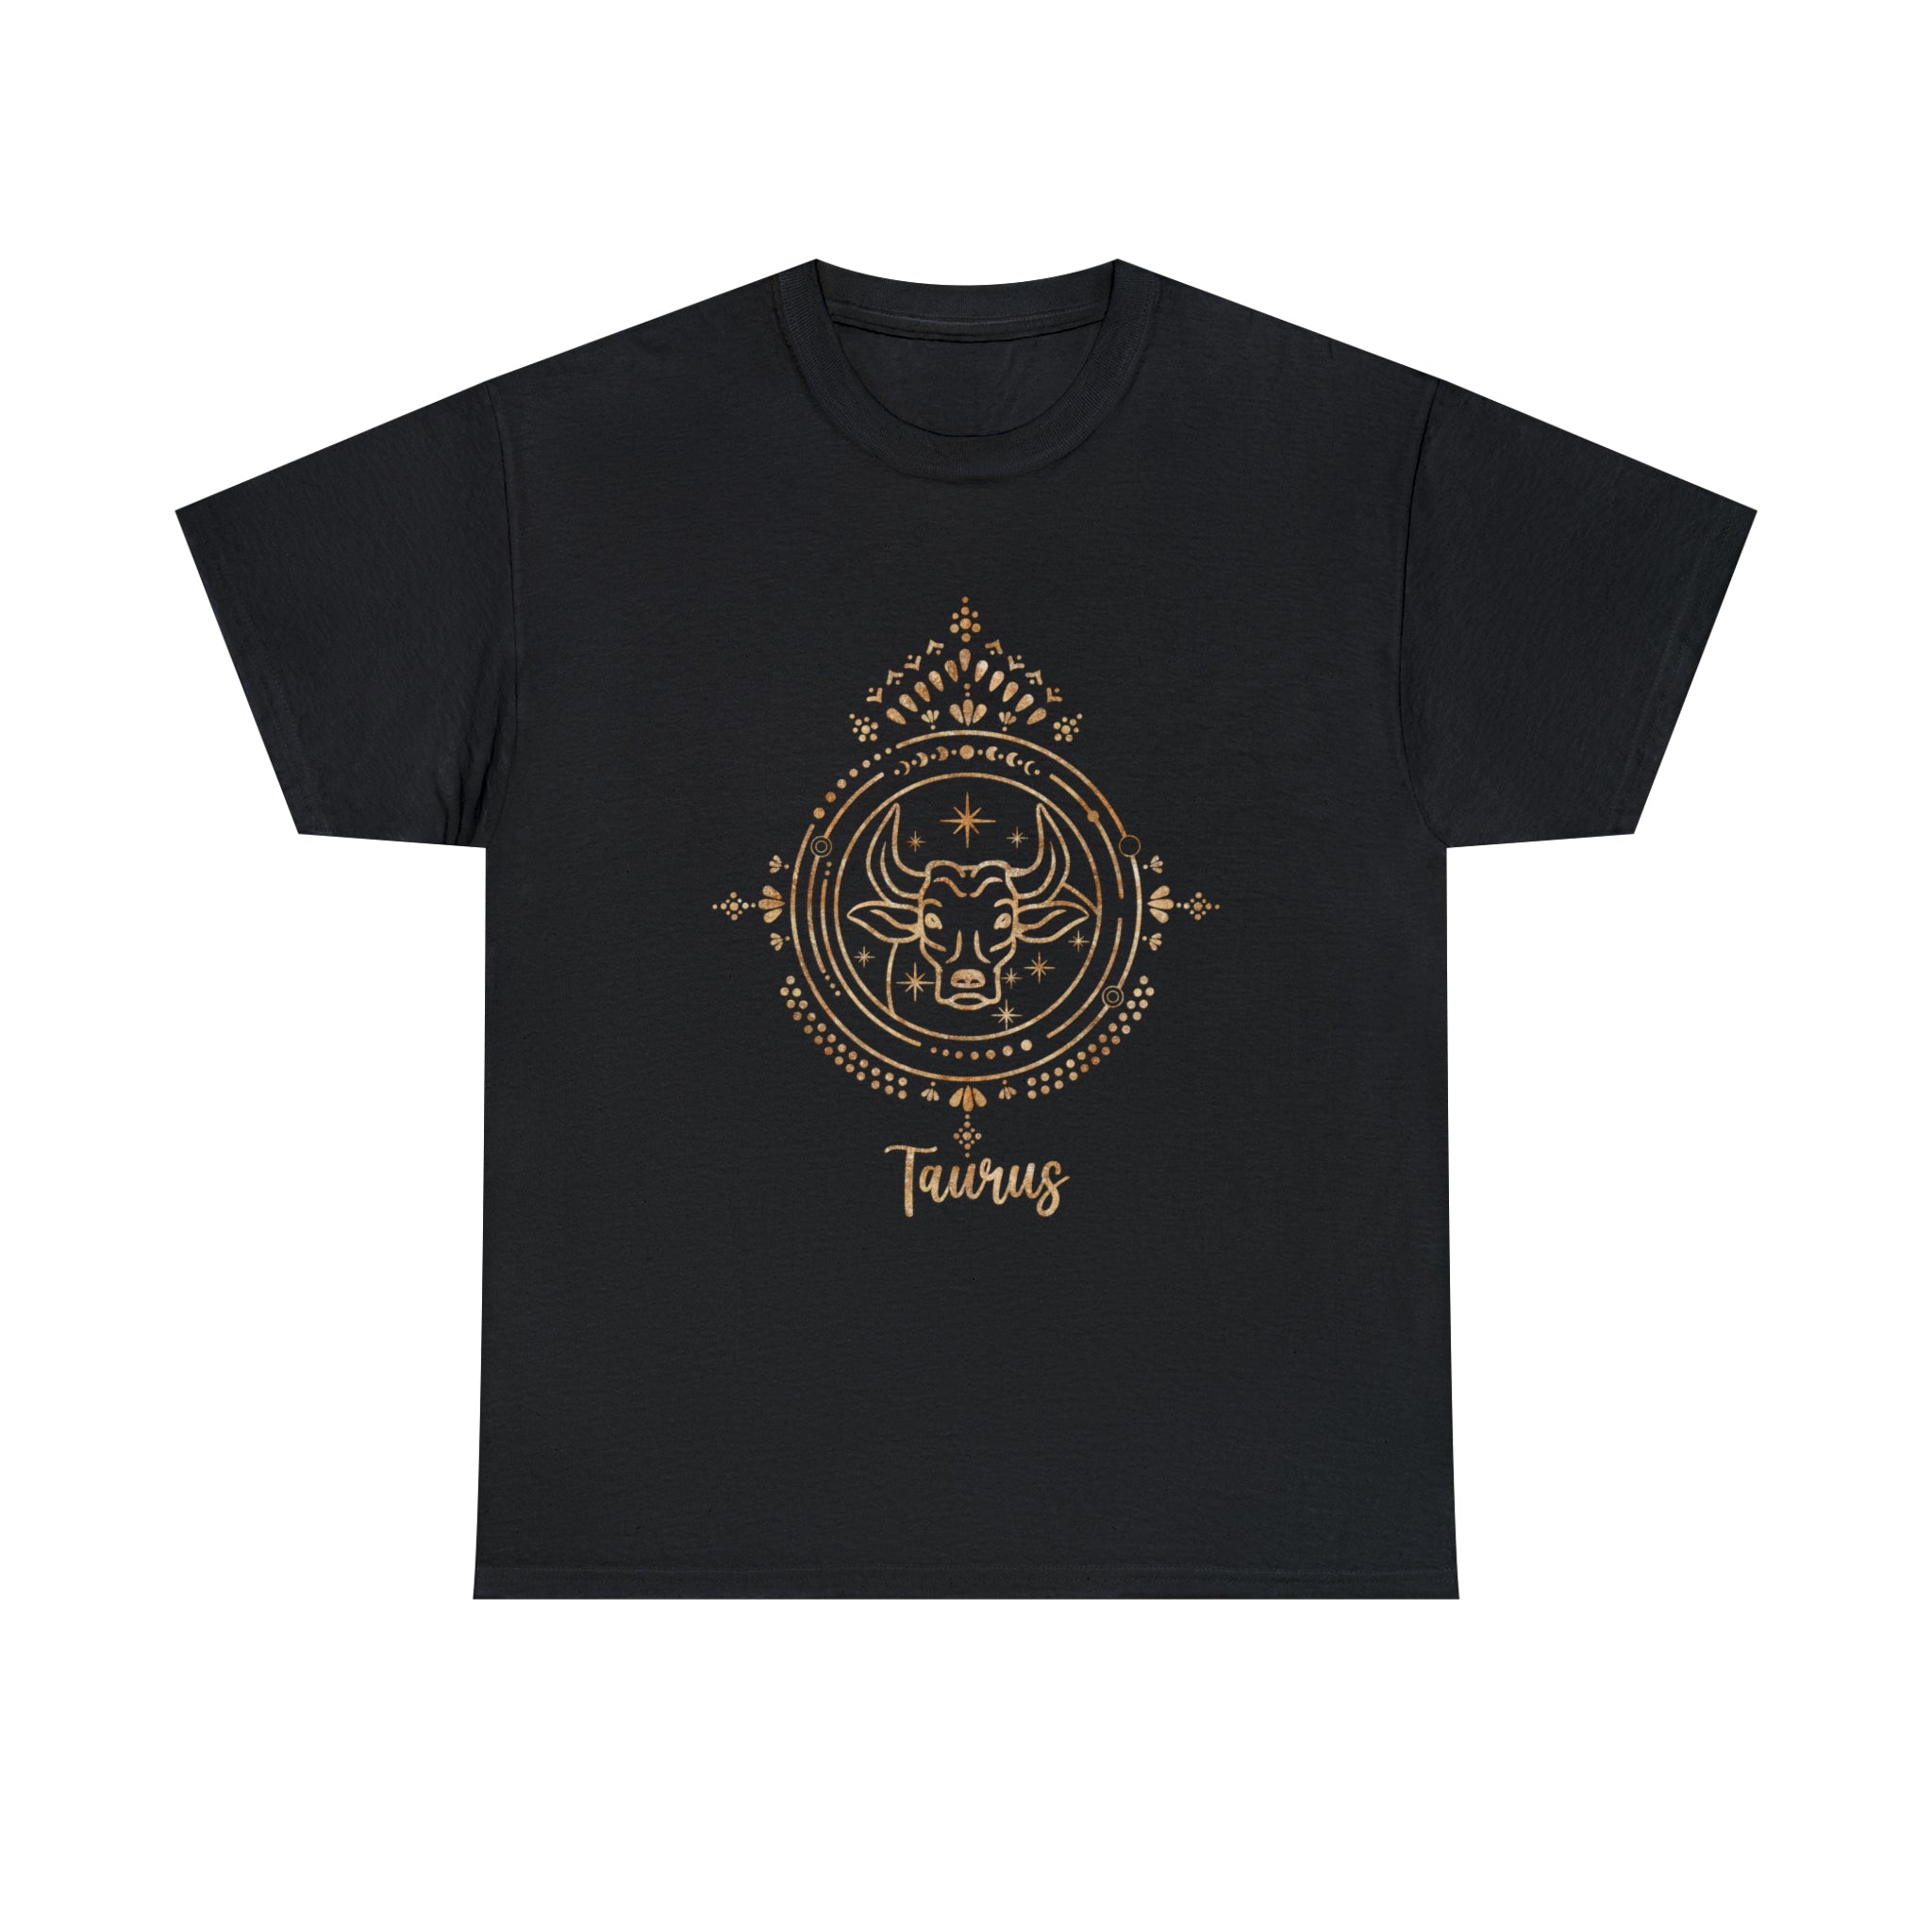 A Tauruses T-Shirt with a gold dragon representing steadfastness and pleasure-seeking.